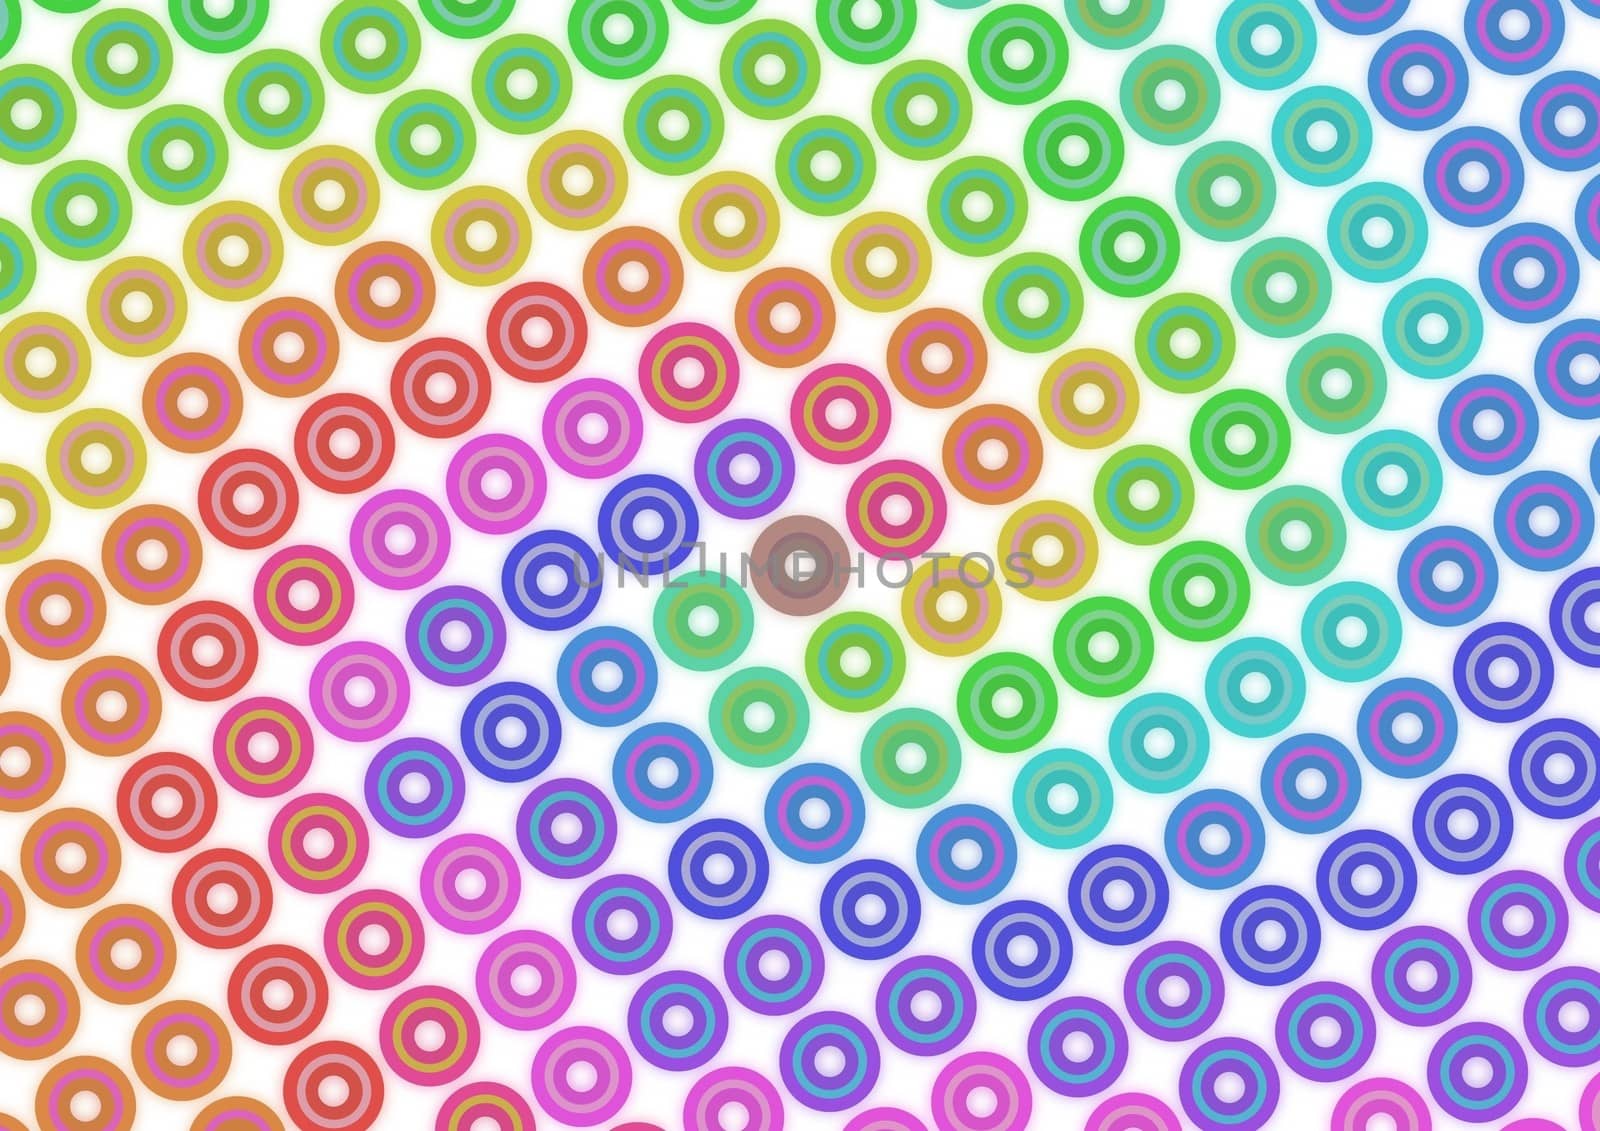 Abstract Illustration of colorful retro circles